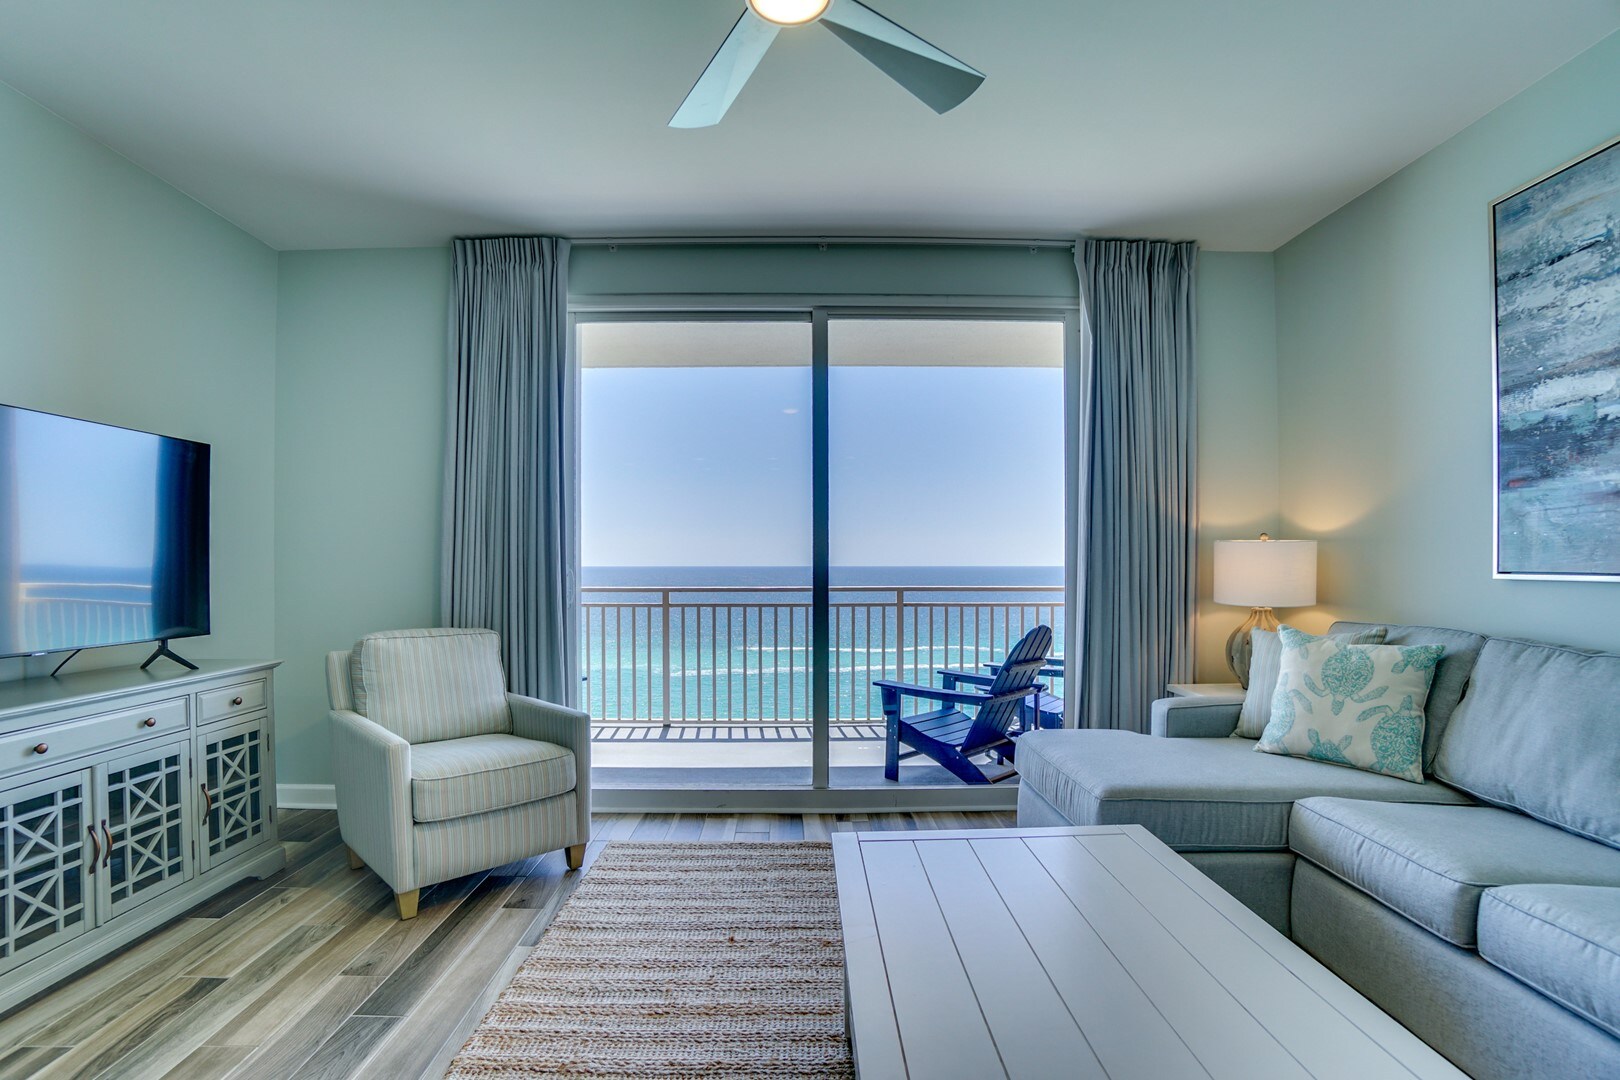 Living Area with Direct Beach & Gulf Views